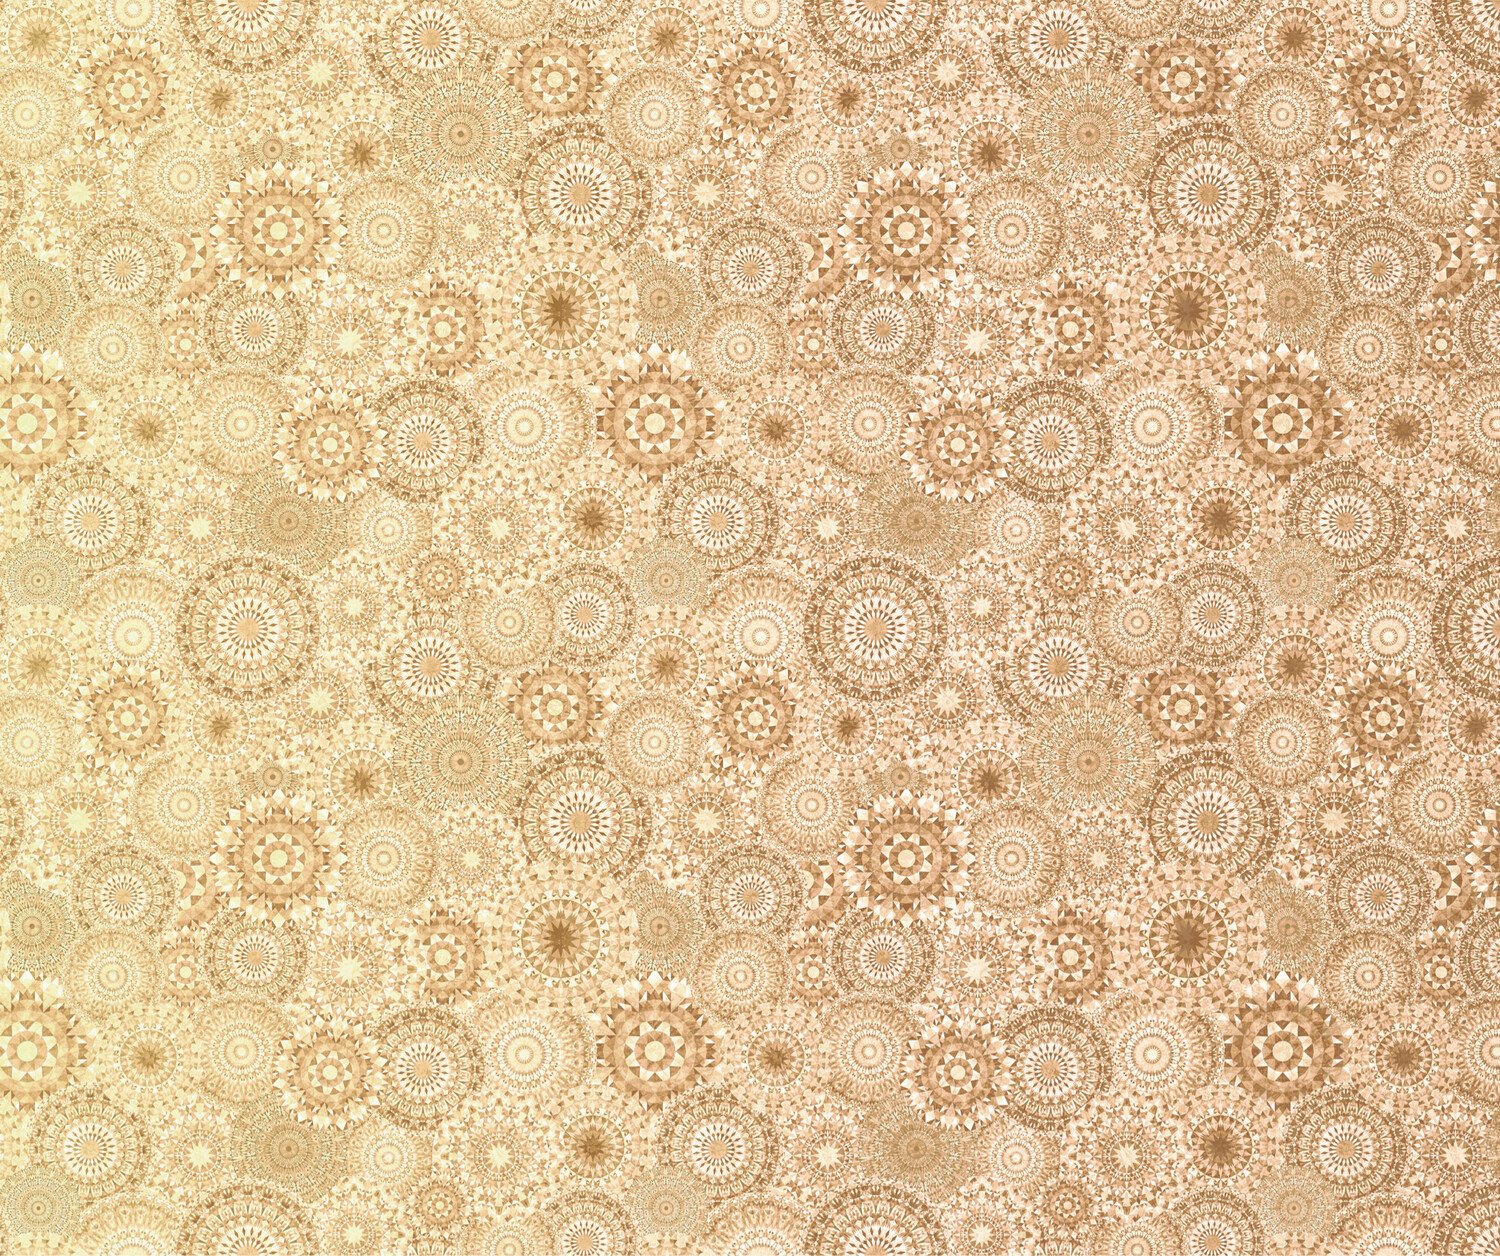 Jewelscape - 28979-EA - Ombré Cream/Brown - 25cm Cut By Width Of Fabric - W03.2